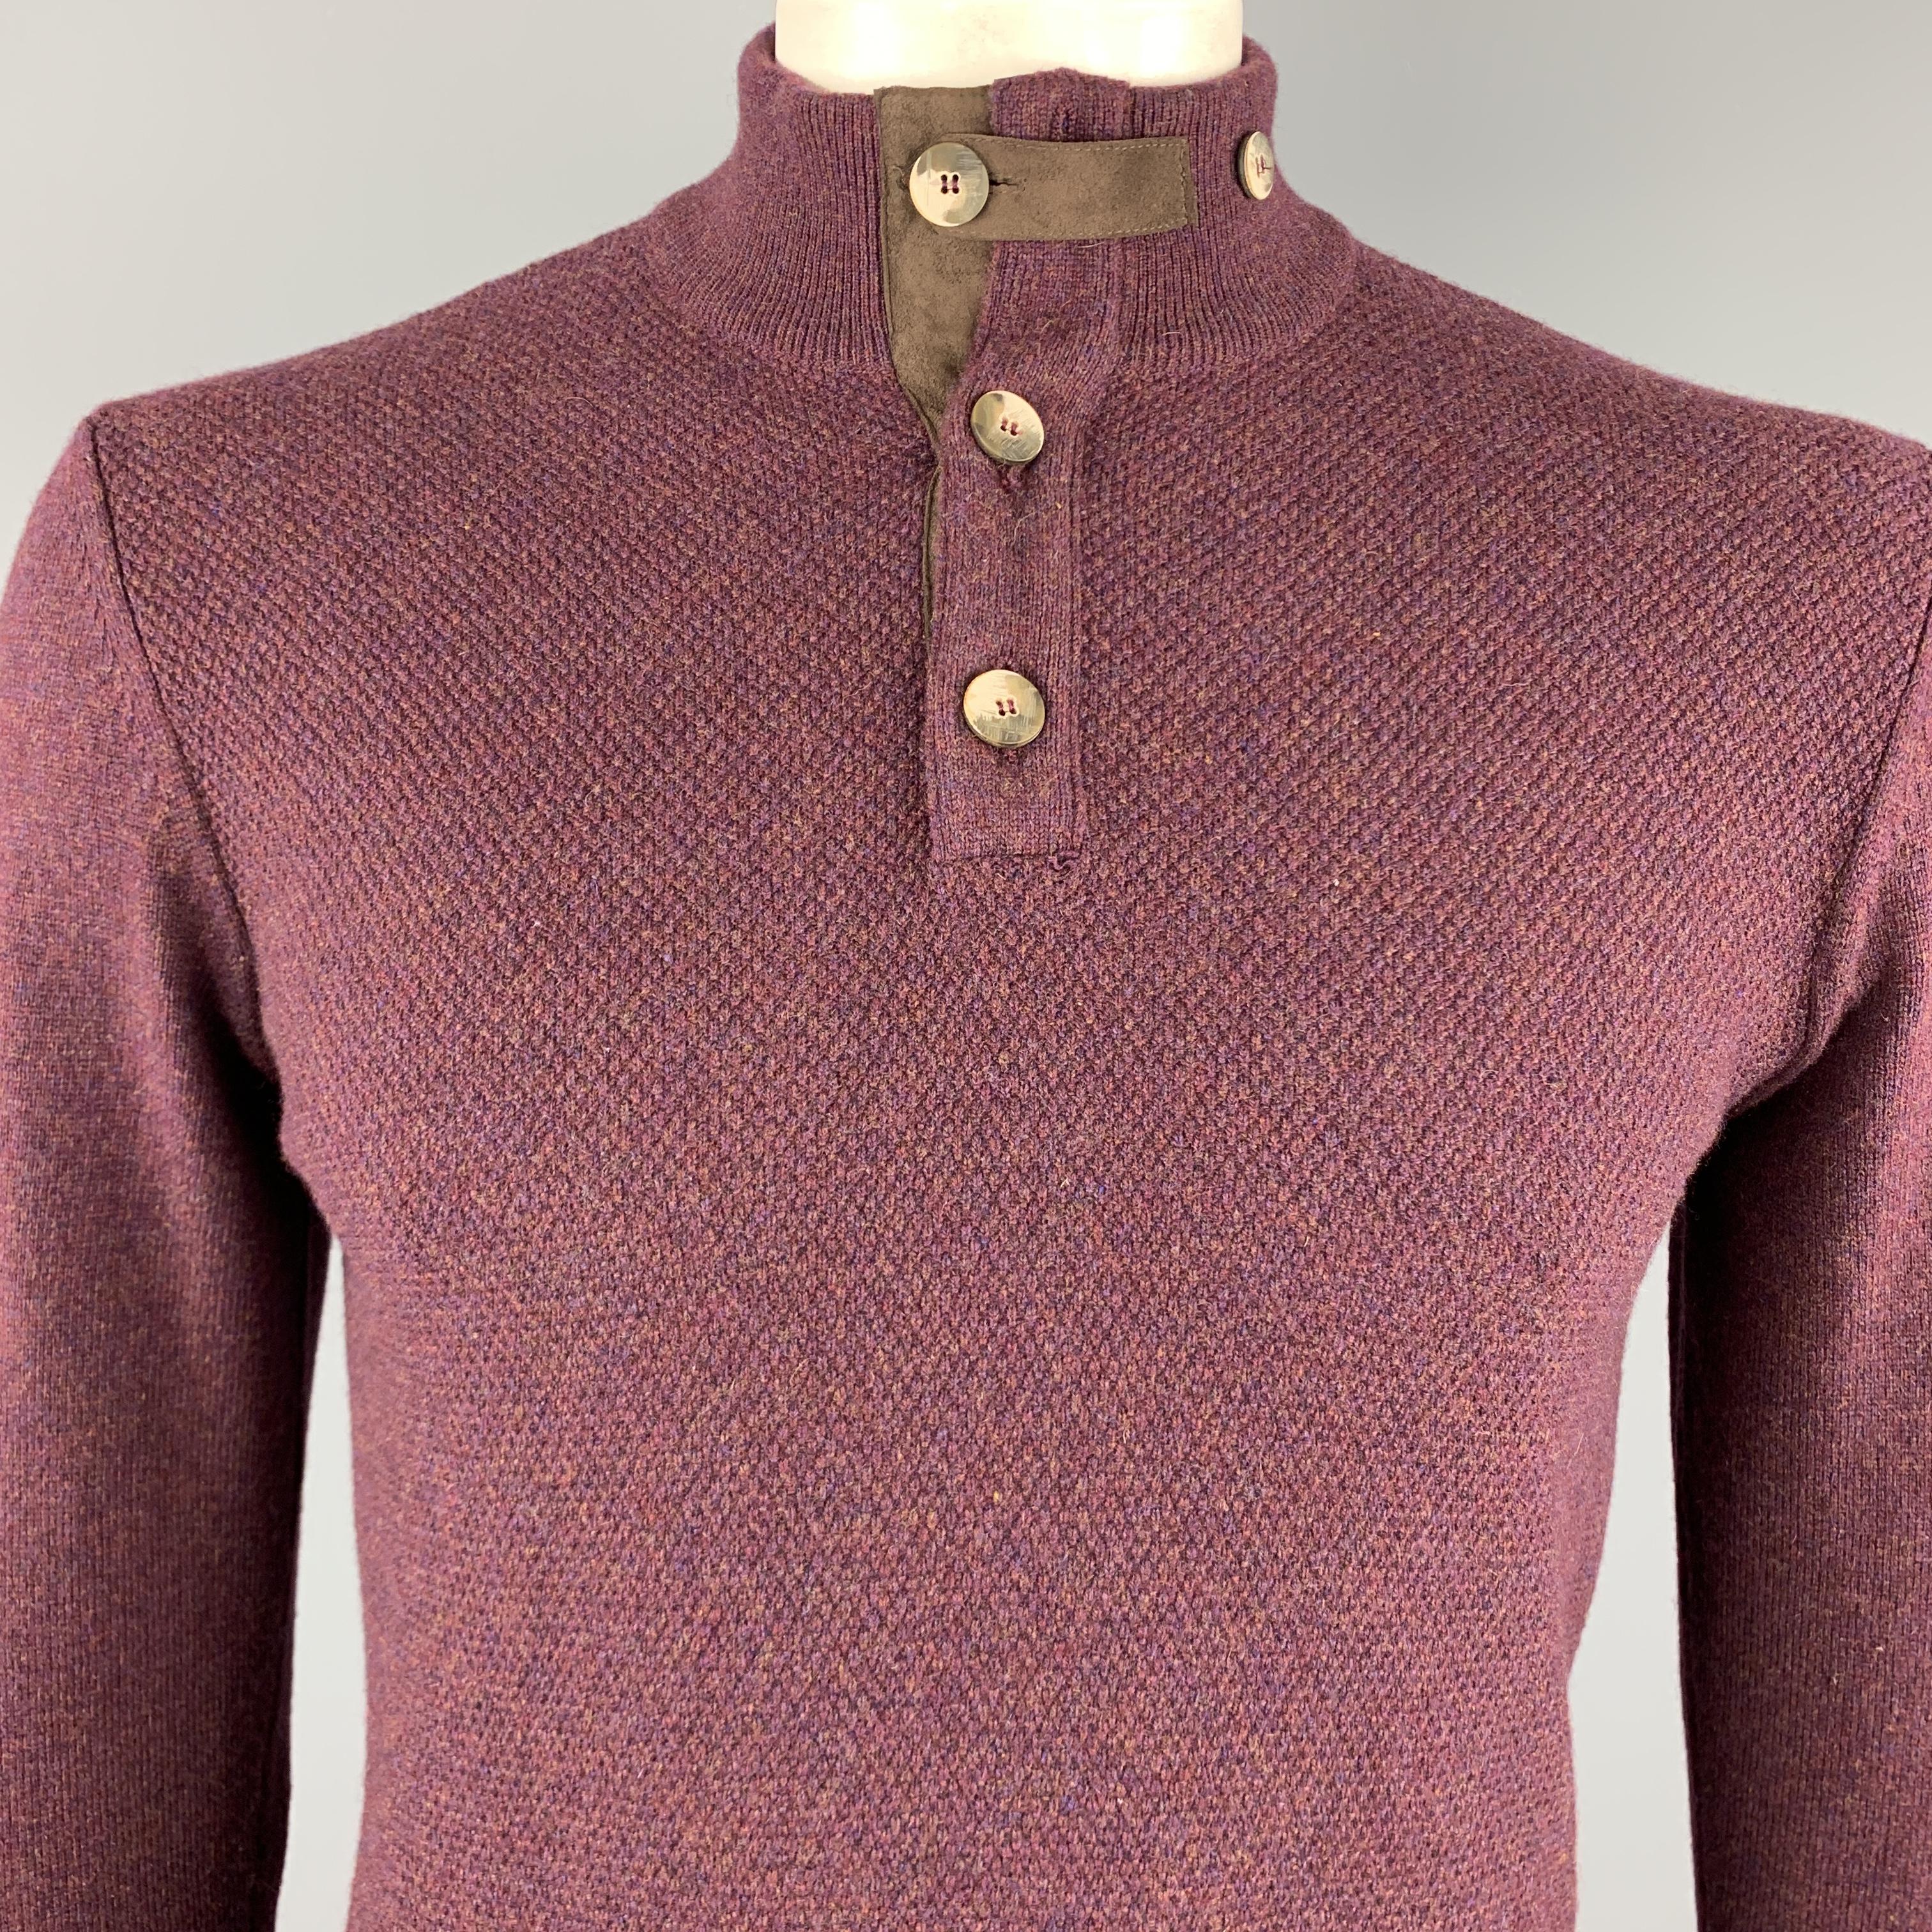 MAURIZIO BALDASSARI pullover comes in a burgundy cashmere featuring a suede trim and a buttoned collar. Made in Italy.

Excellent Pre-Owned Condition.
Marked: M

Measurements:

Shoulder: 18 in. 
Chest: 40 in. 
Sleeve: 25 in. 
Length: 25 in. 

